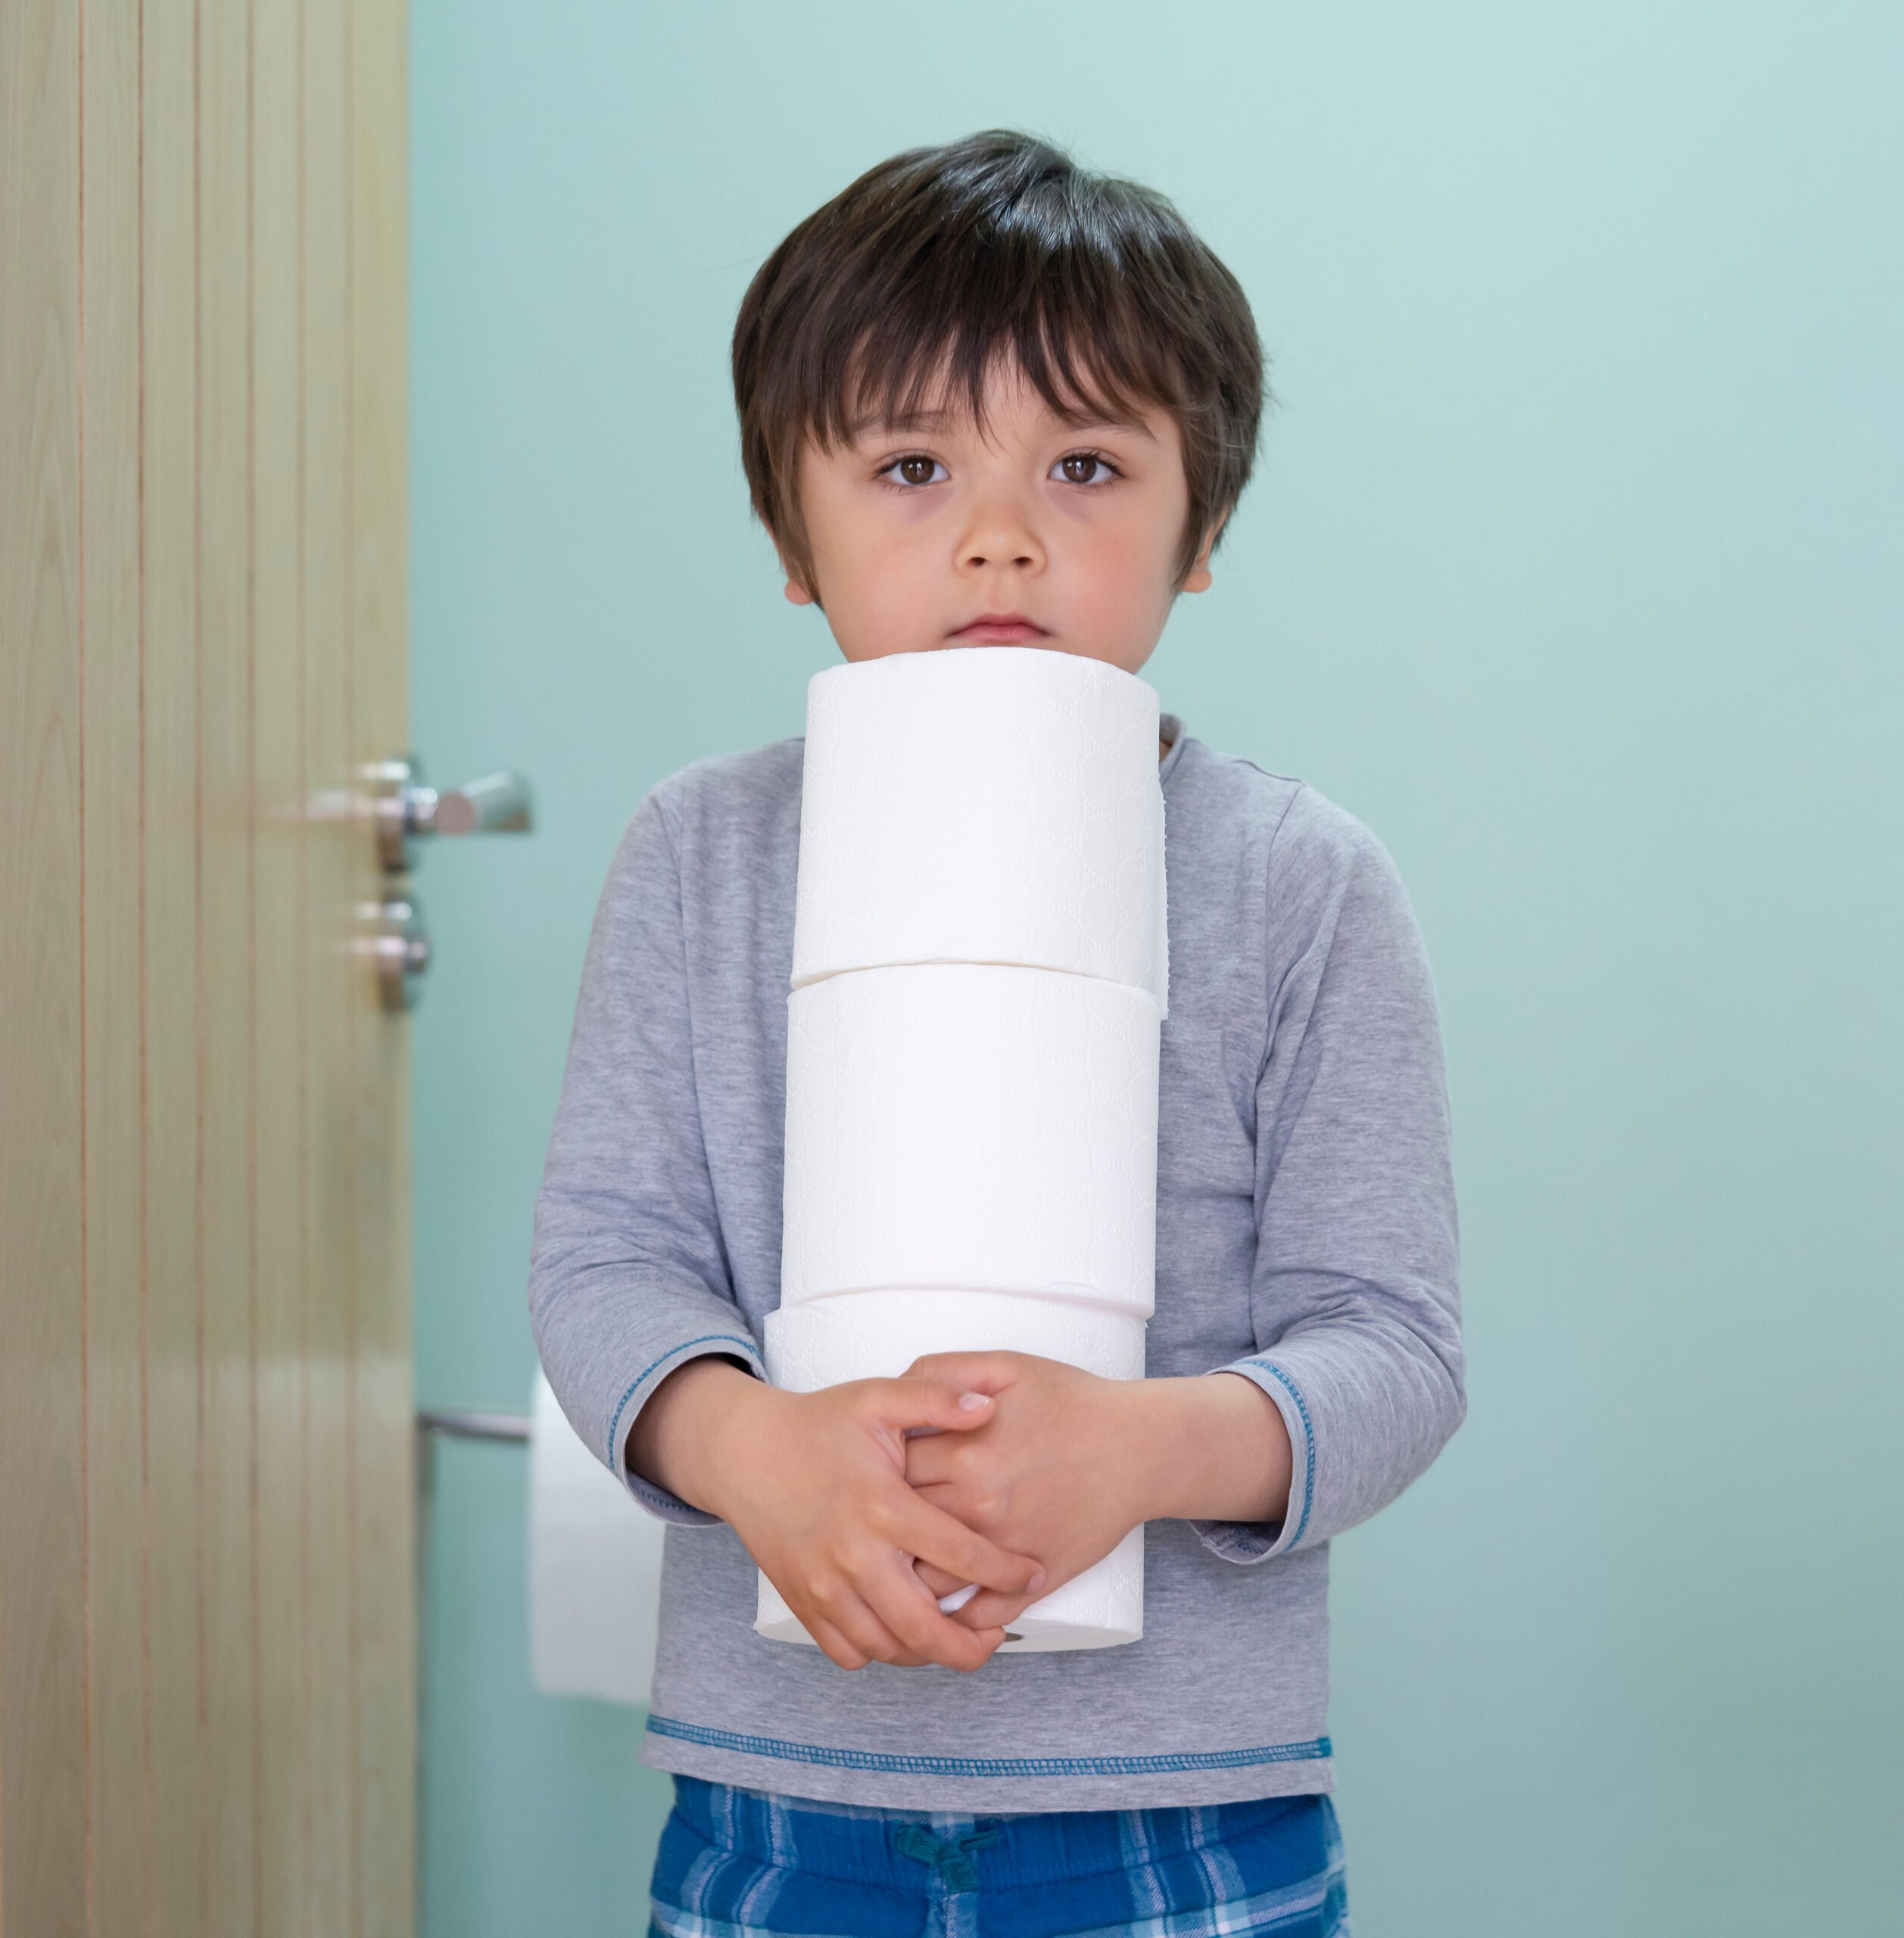 What to Feed a Toddler with Diarrhea